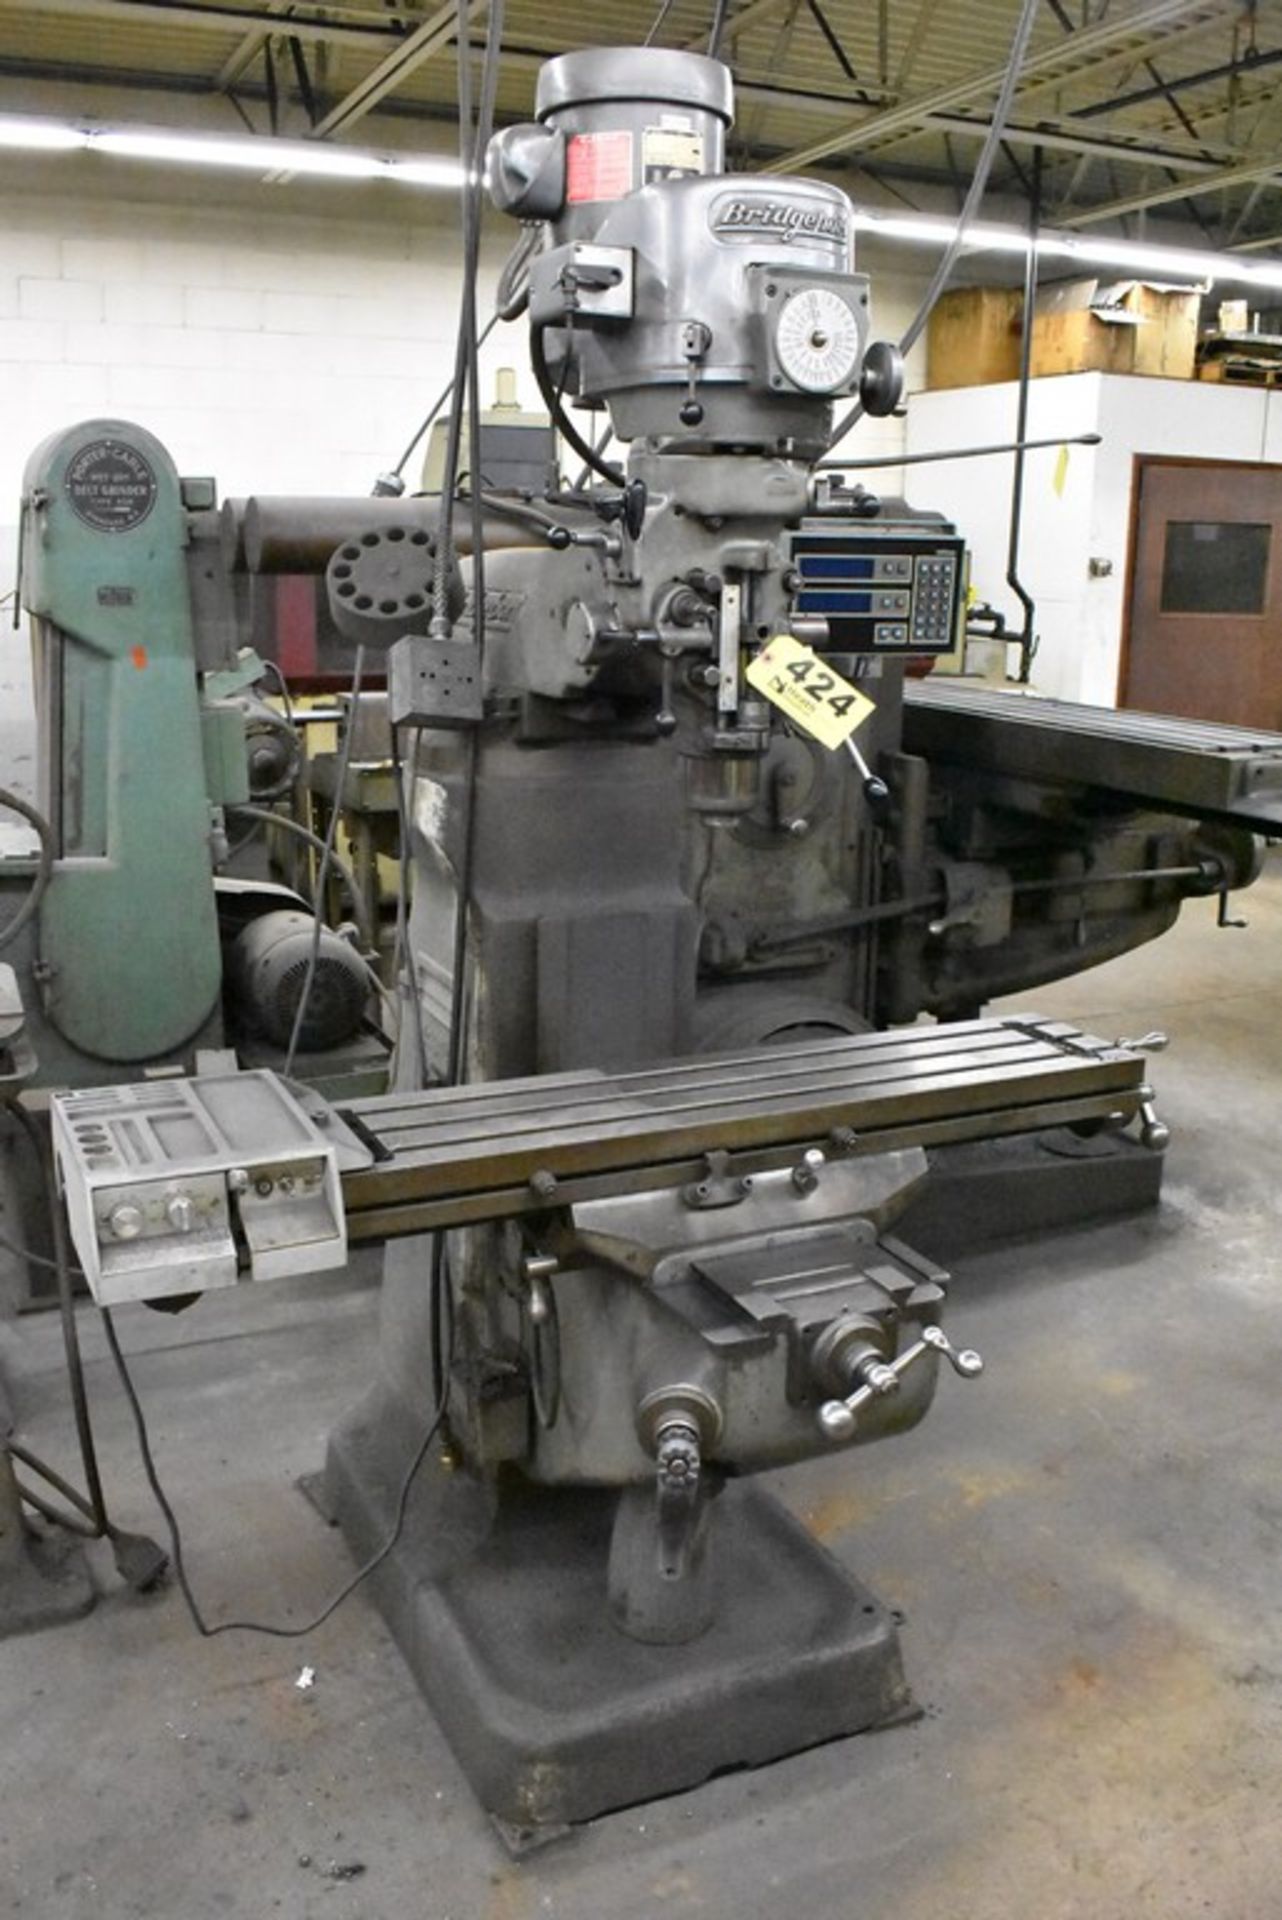 BRIDGEPORT 1-1/2 HP VARIABLE SPEED RAM TYPE VERTICAL MILL, S/N 12BR156414, 42" TABLE WITH POWER - Image 8 of 8